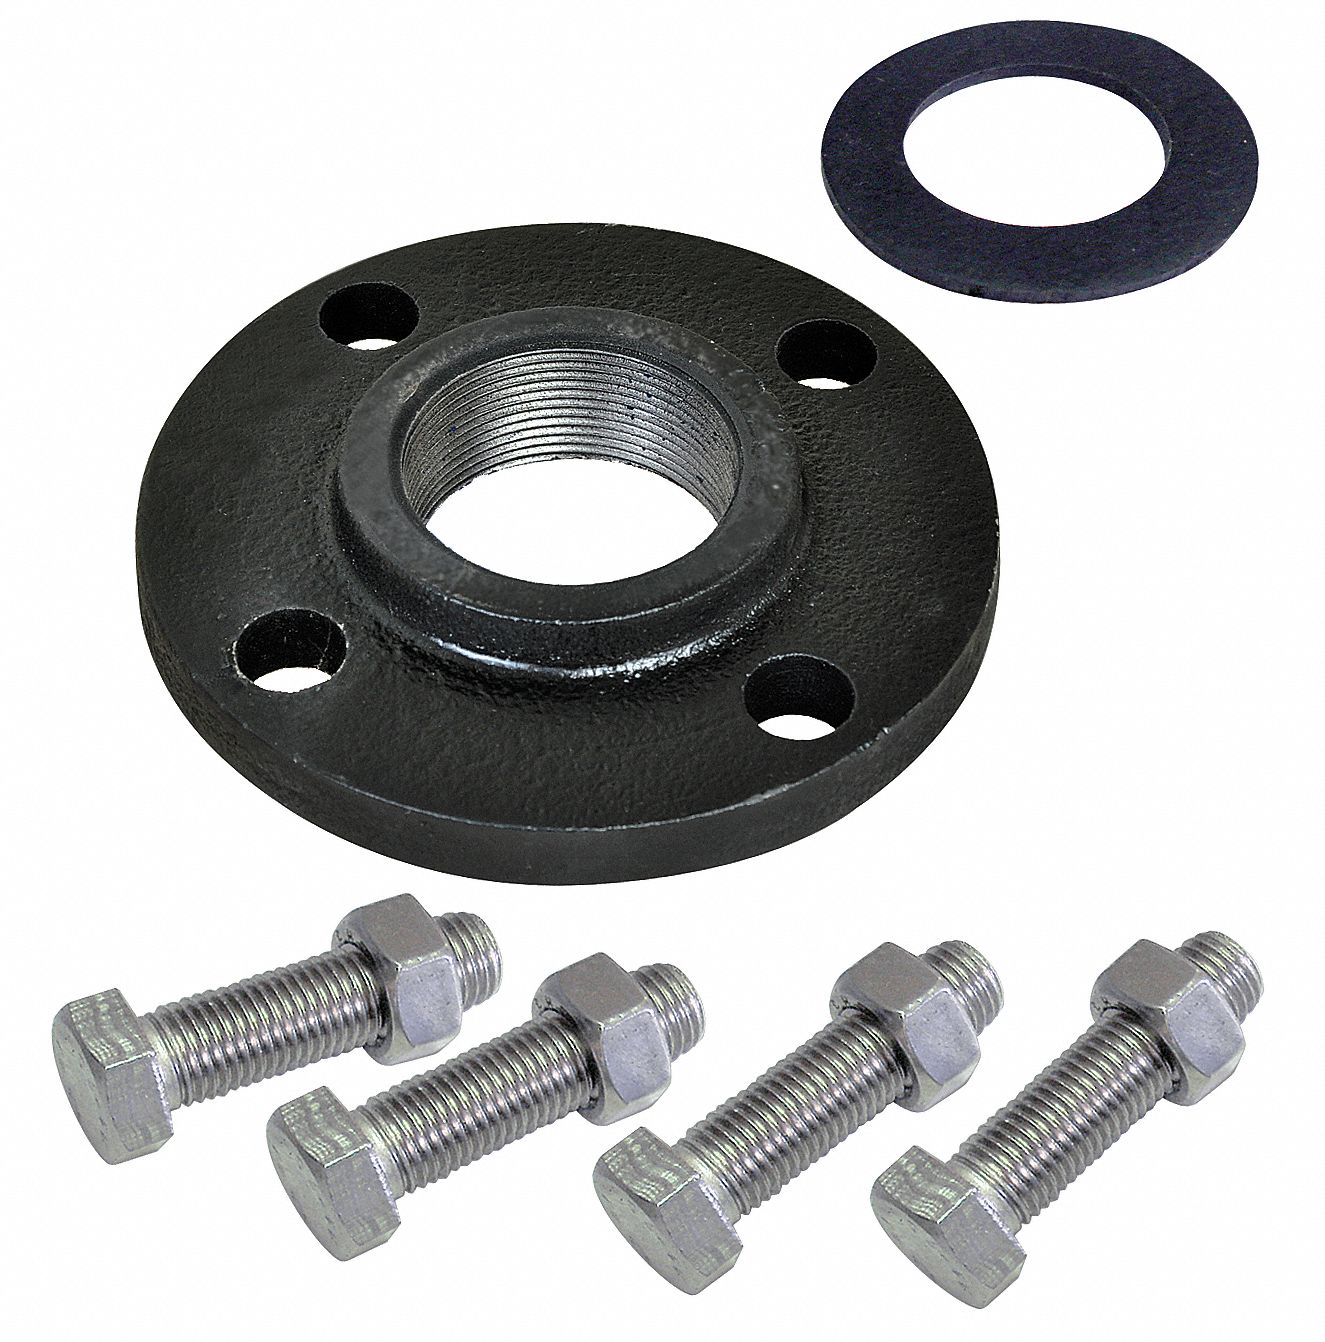 21R870 - Booster Pump Flange Kit 1-1/4 in NPT CI